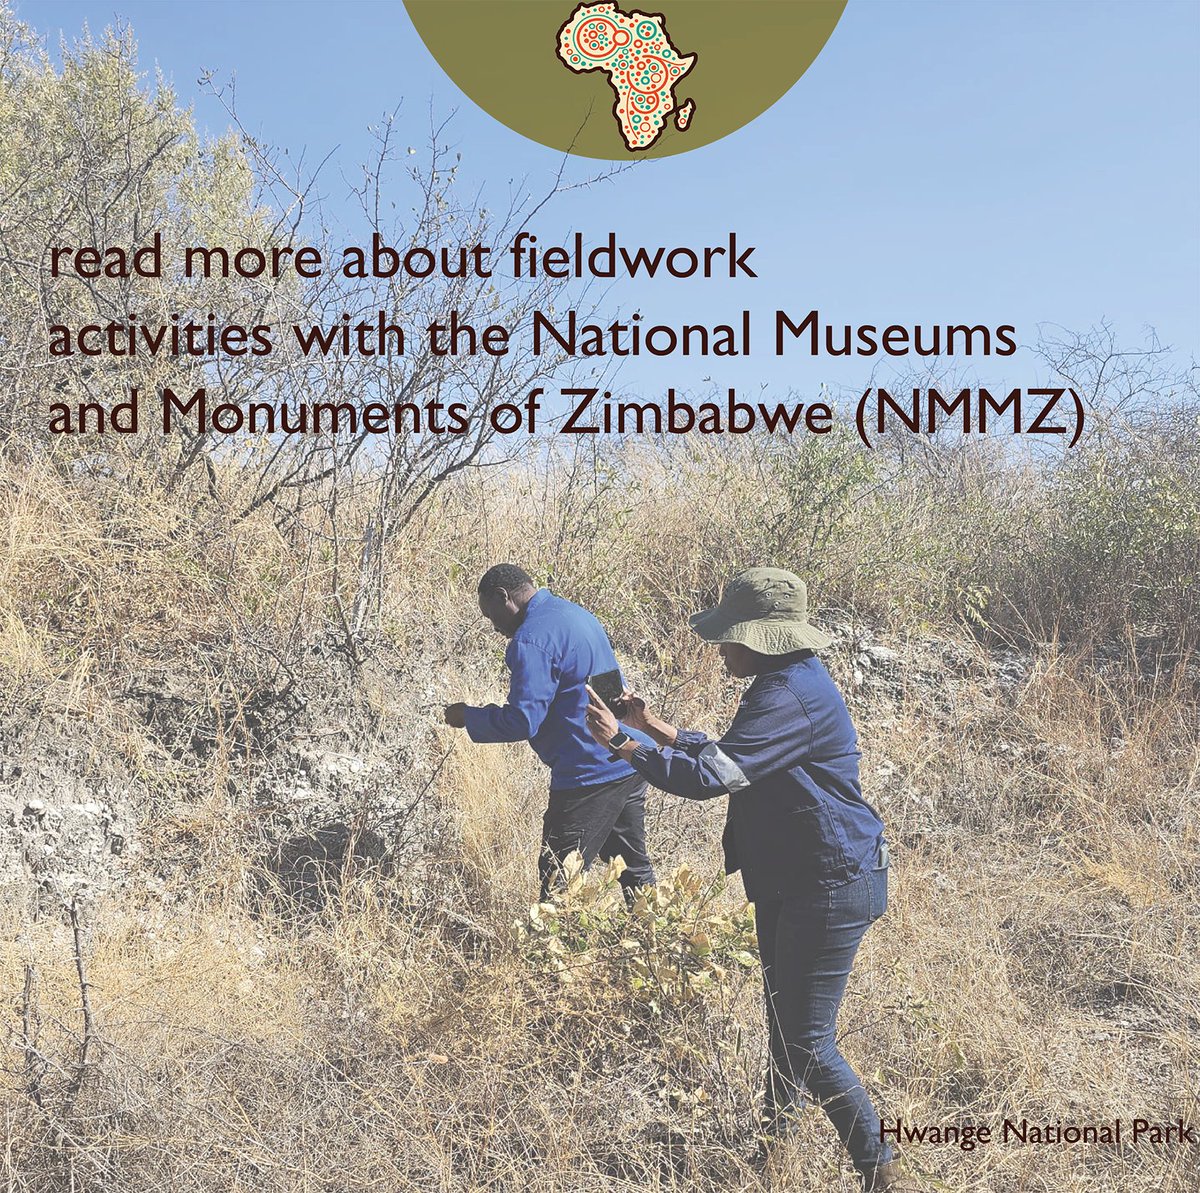 Visit our new Zimbabwe heritage webpage @ maeasam.org/zimbabwe/ in collaboration with the National Museums and Monuments of Zimbabwe (NMMZ)!

#ZimbabweHeritage #Archaeology #DidYouKnow